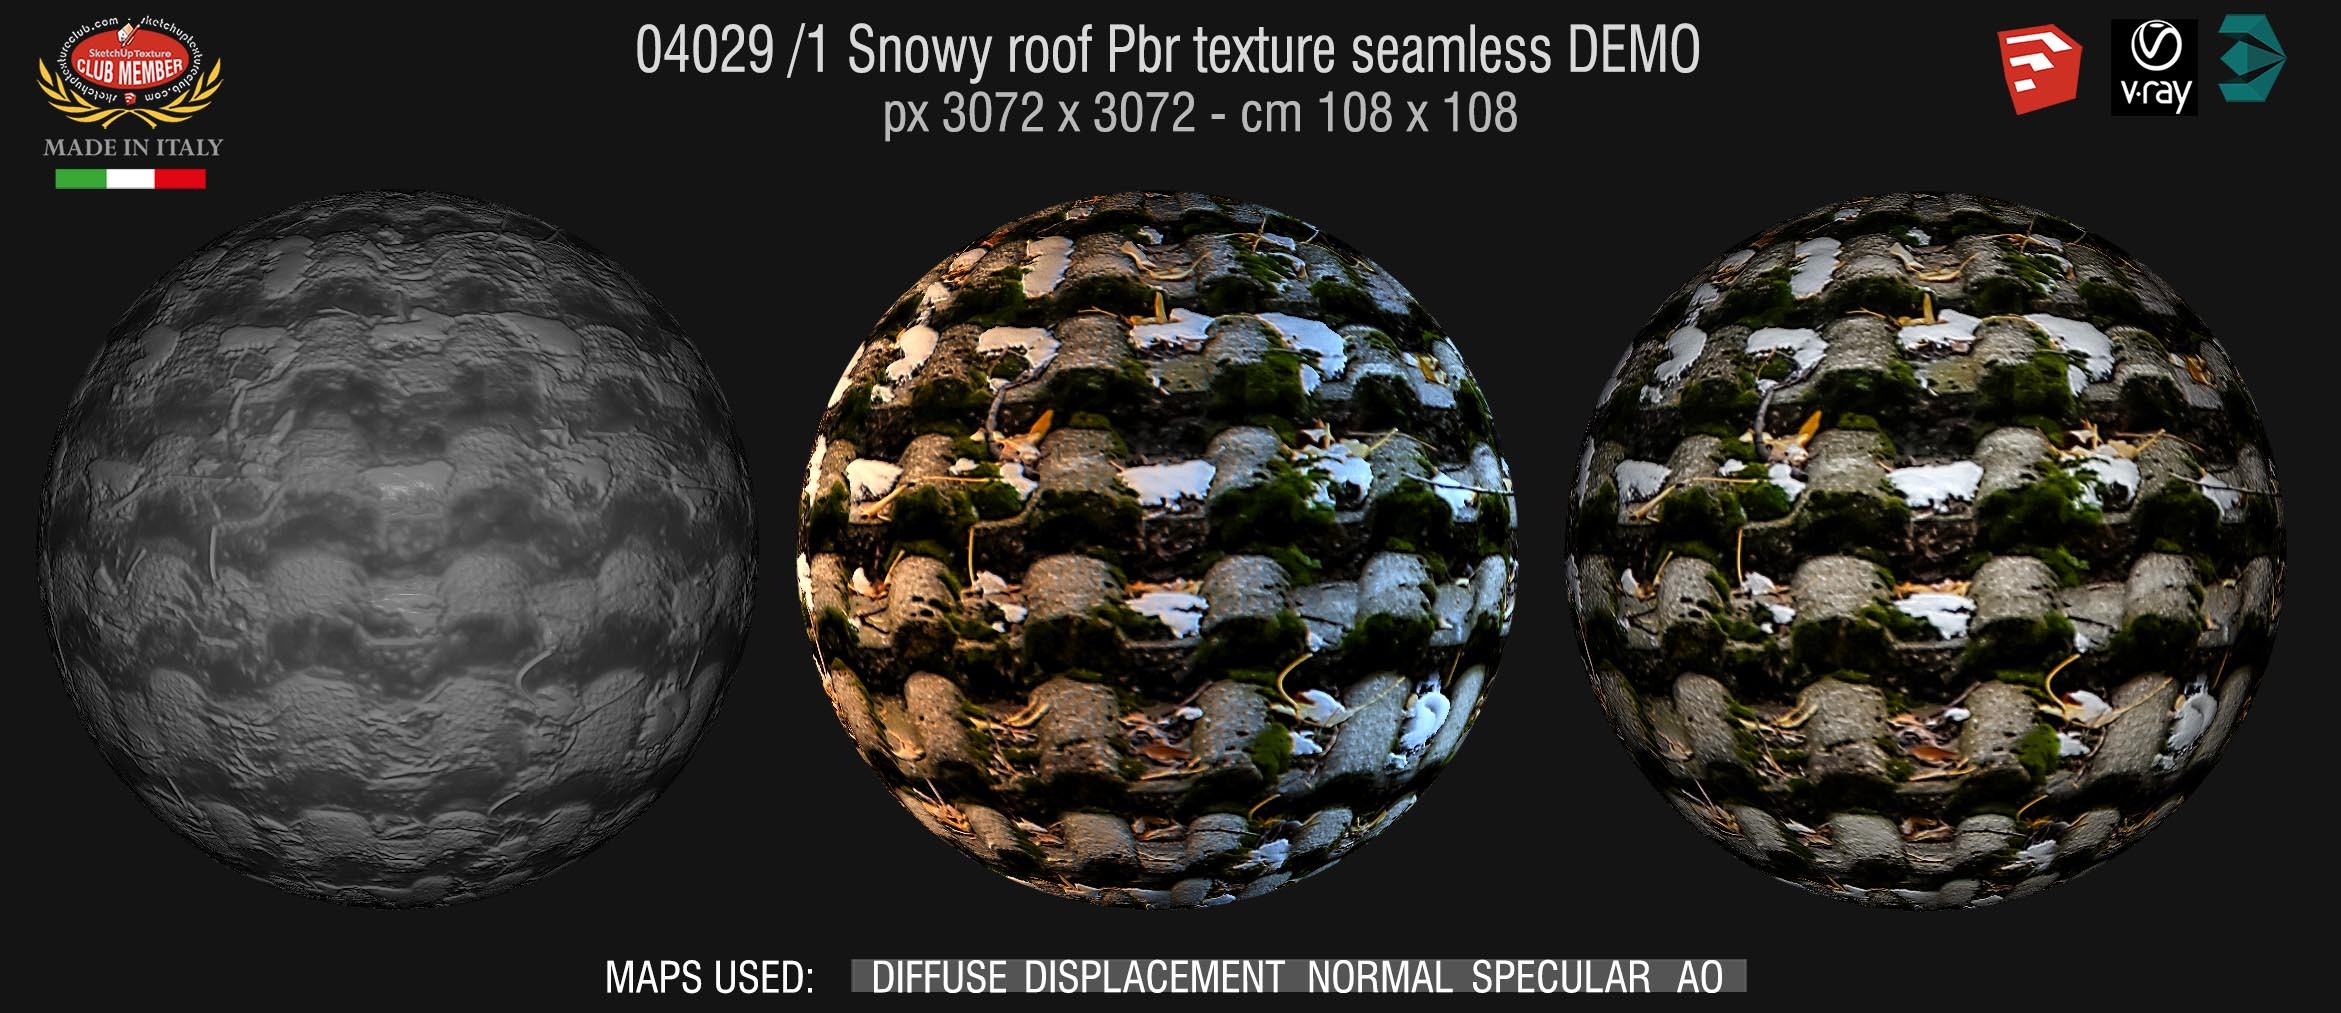 04029 /1 Snowy roof Pbr texture seamless DEMO